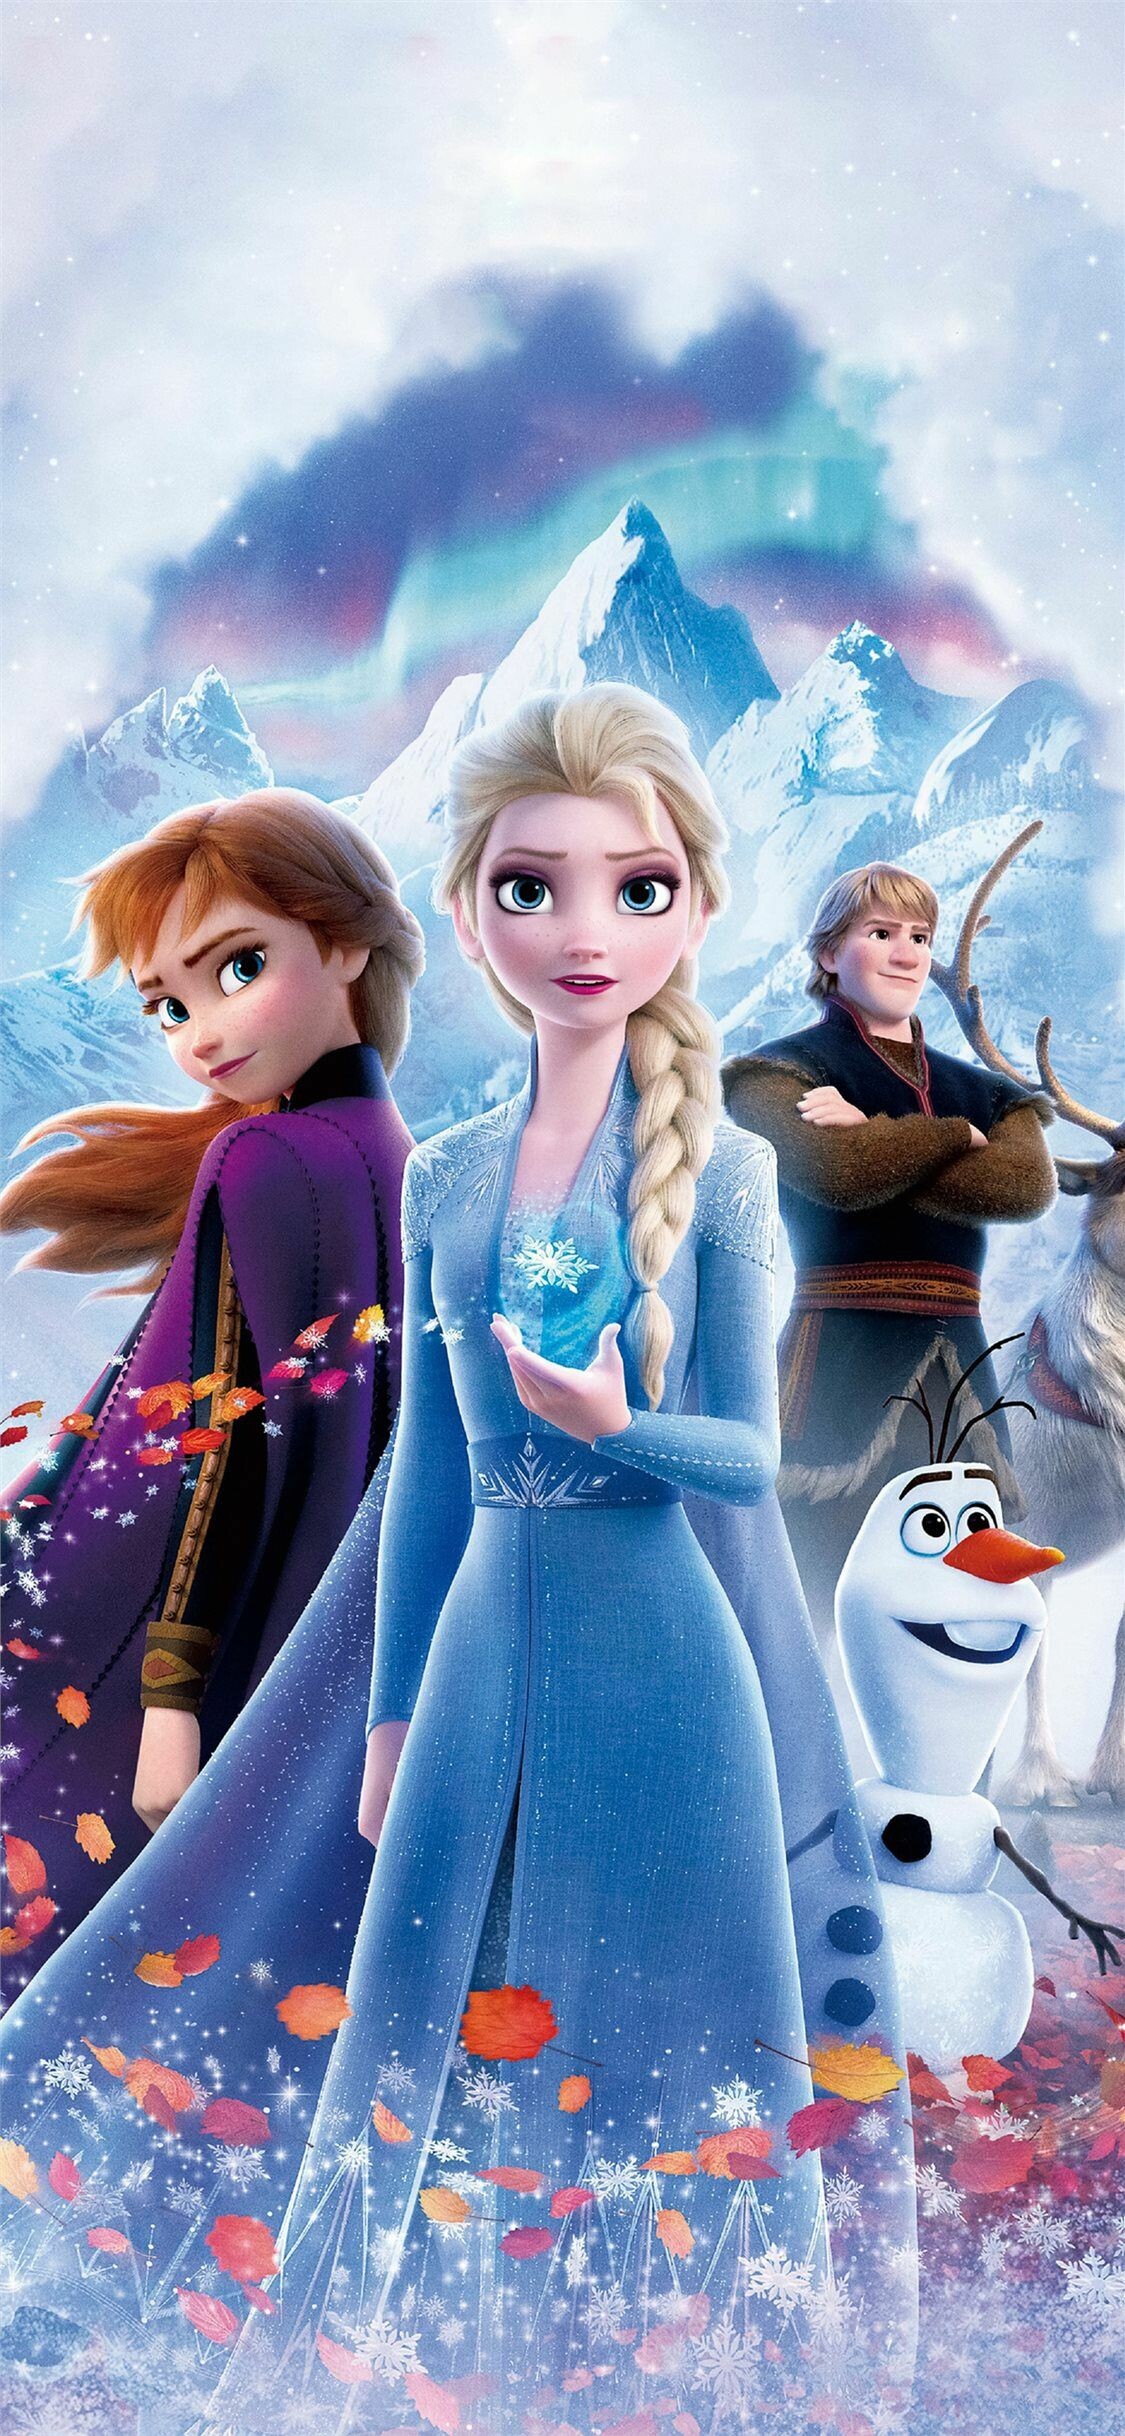 Frozen: The story centers fearless optimist but also naive Princess Anna, who embarks on a perilous journey to save her kingdom from a curse conjured by her older sister, Queen Elsa. 1130x2440 HD Wallpaper.